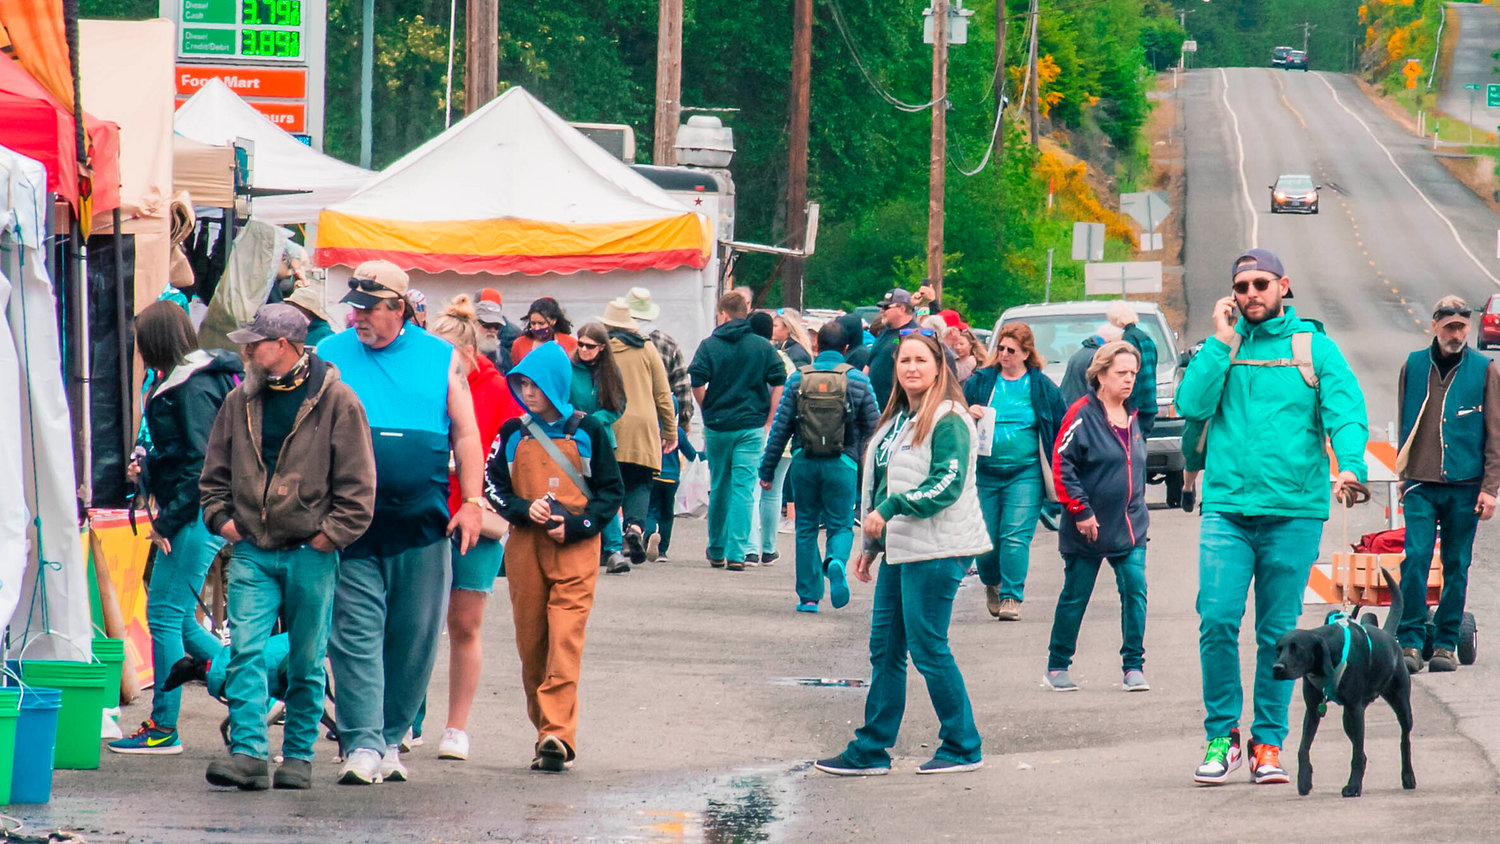 Crowds gather at the Packwood Flea Market on Friday.